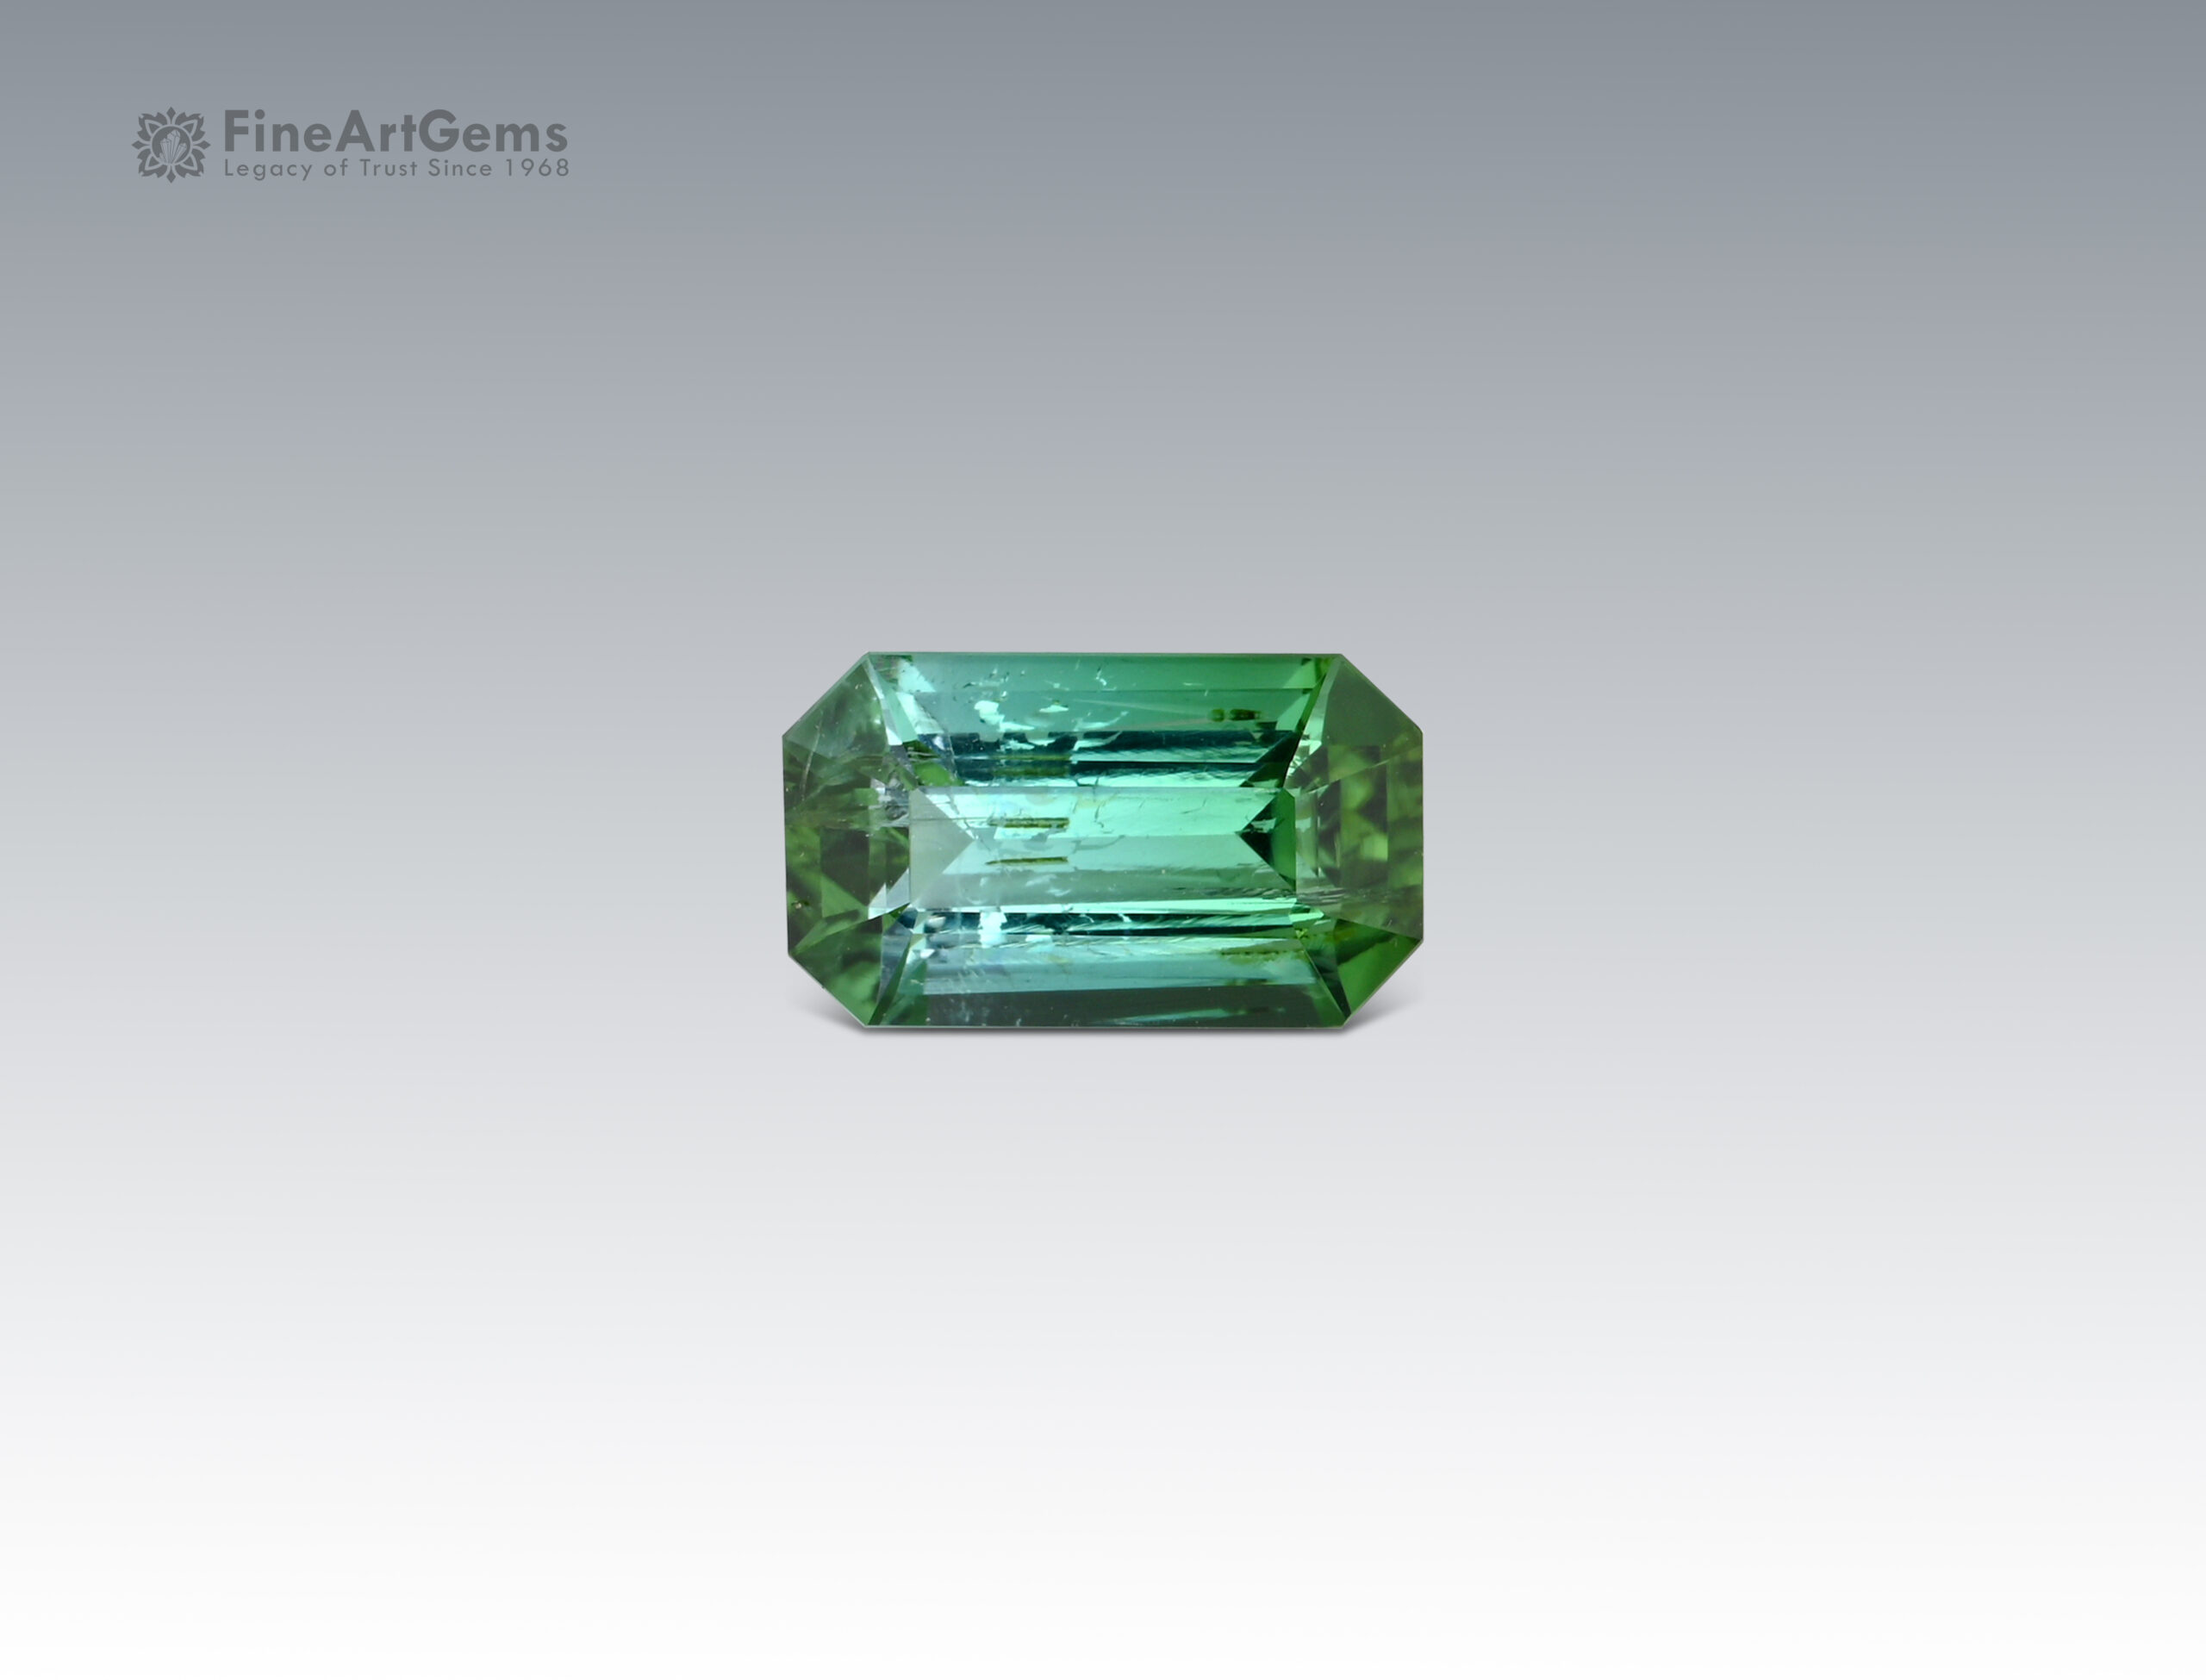 1.2 Carats Beautiful Green Tourmaline Natural Gemstone from Afghanistan